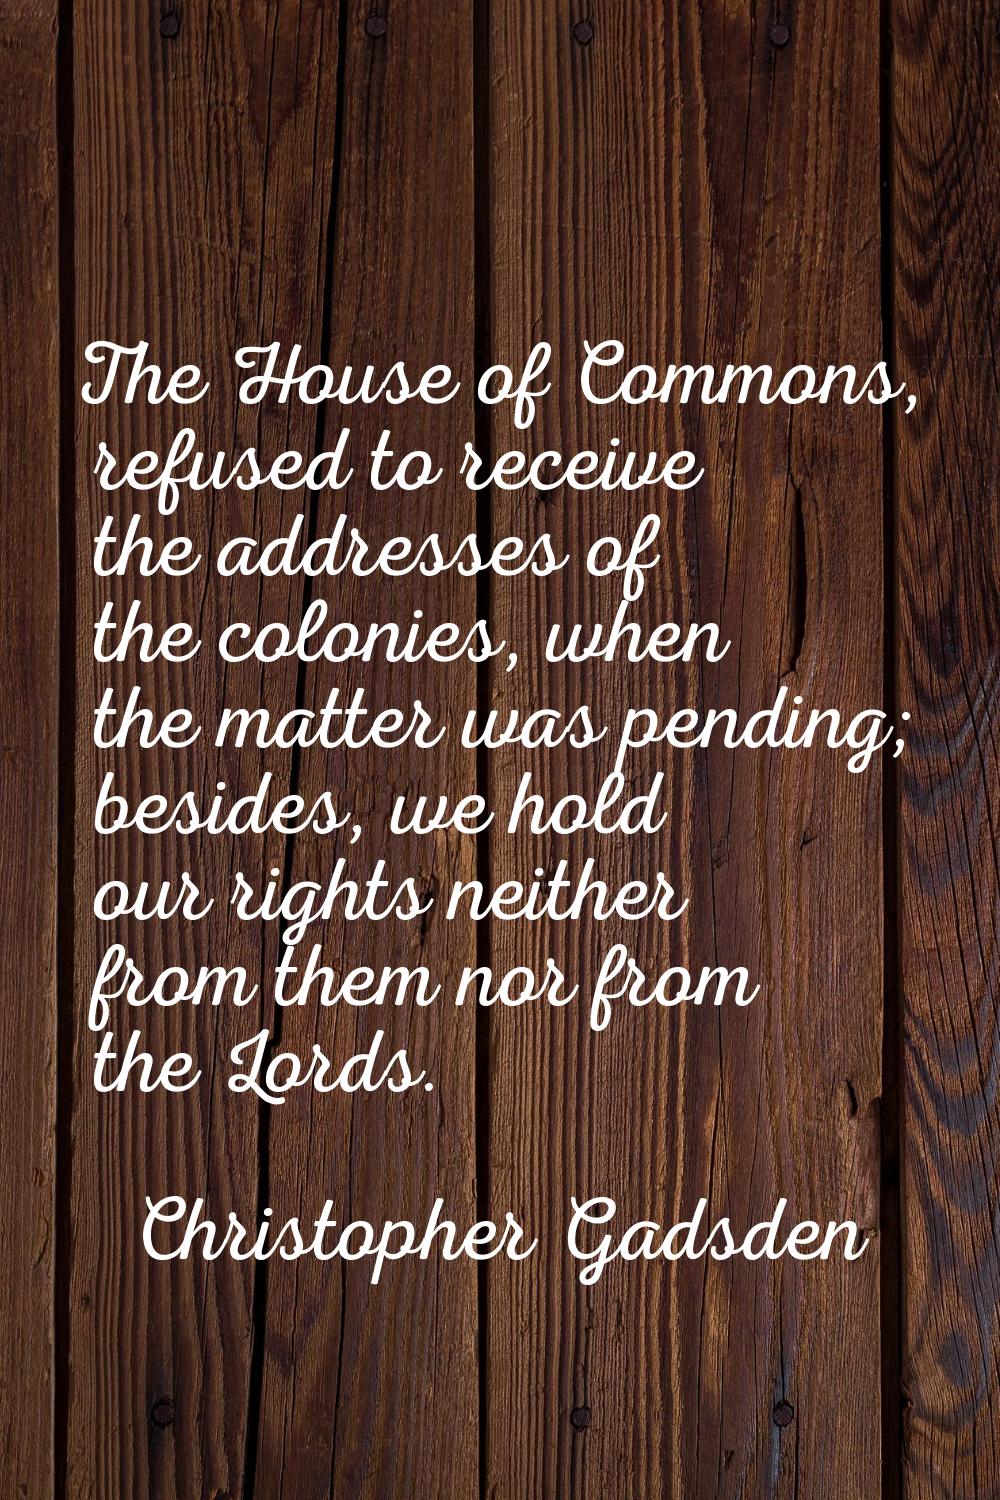 The House of Commons, refused to receive the addresses of the colonies, when the matter was pending